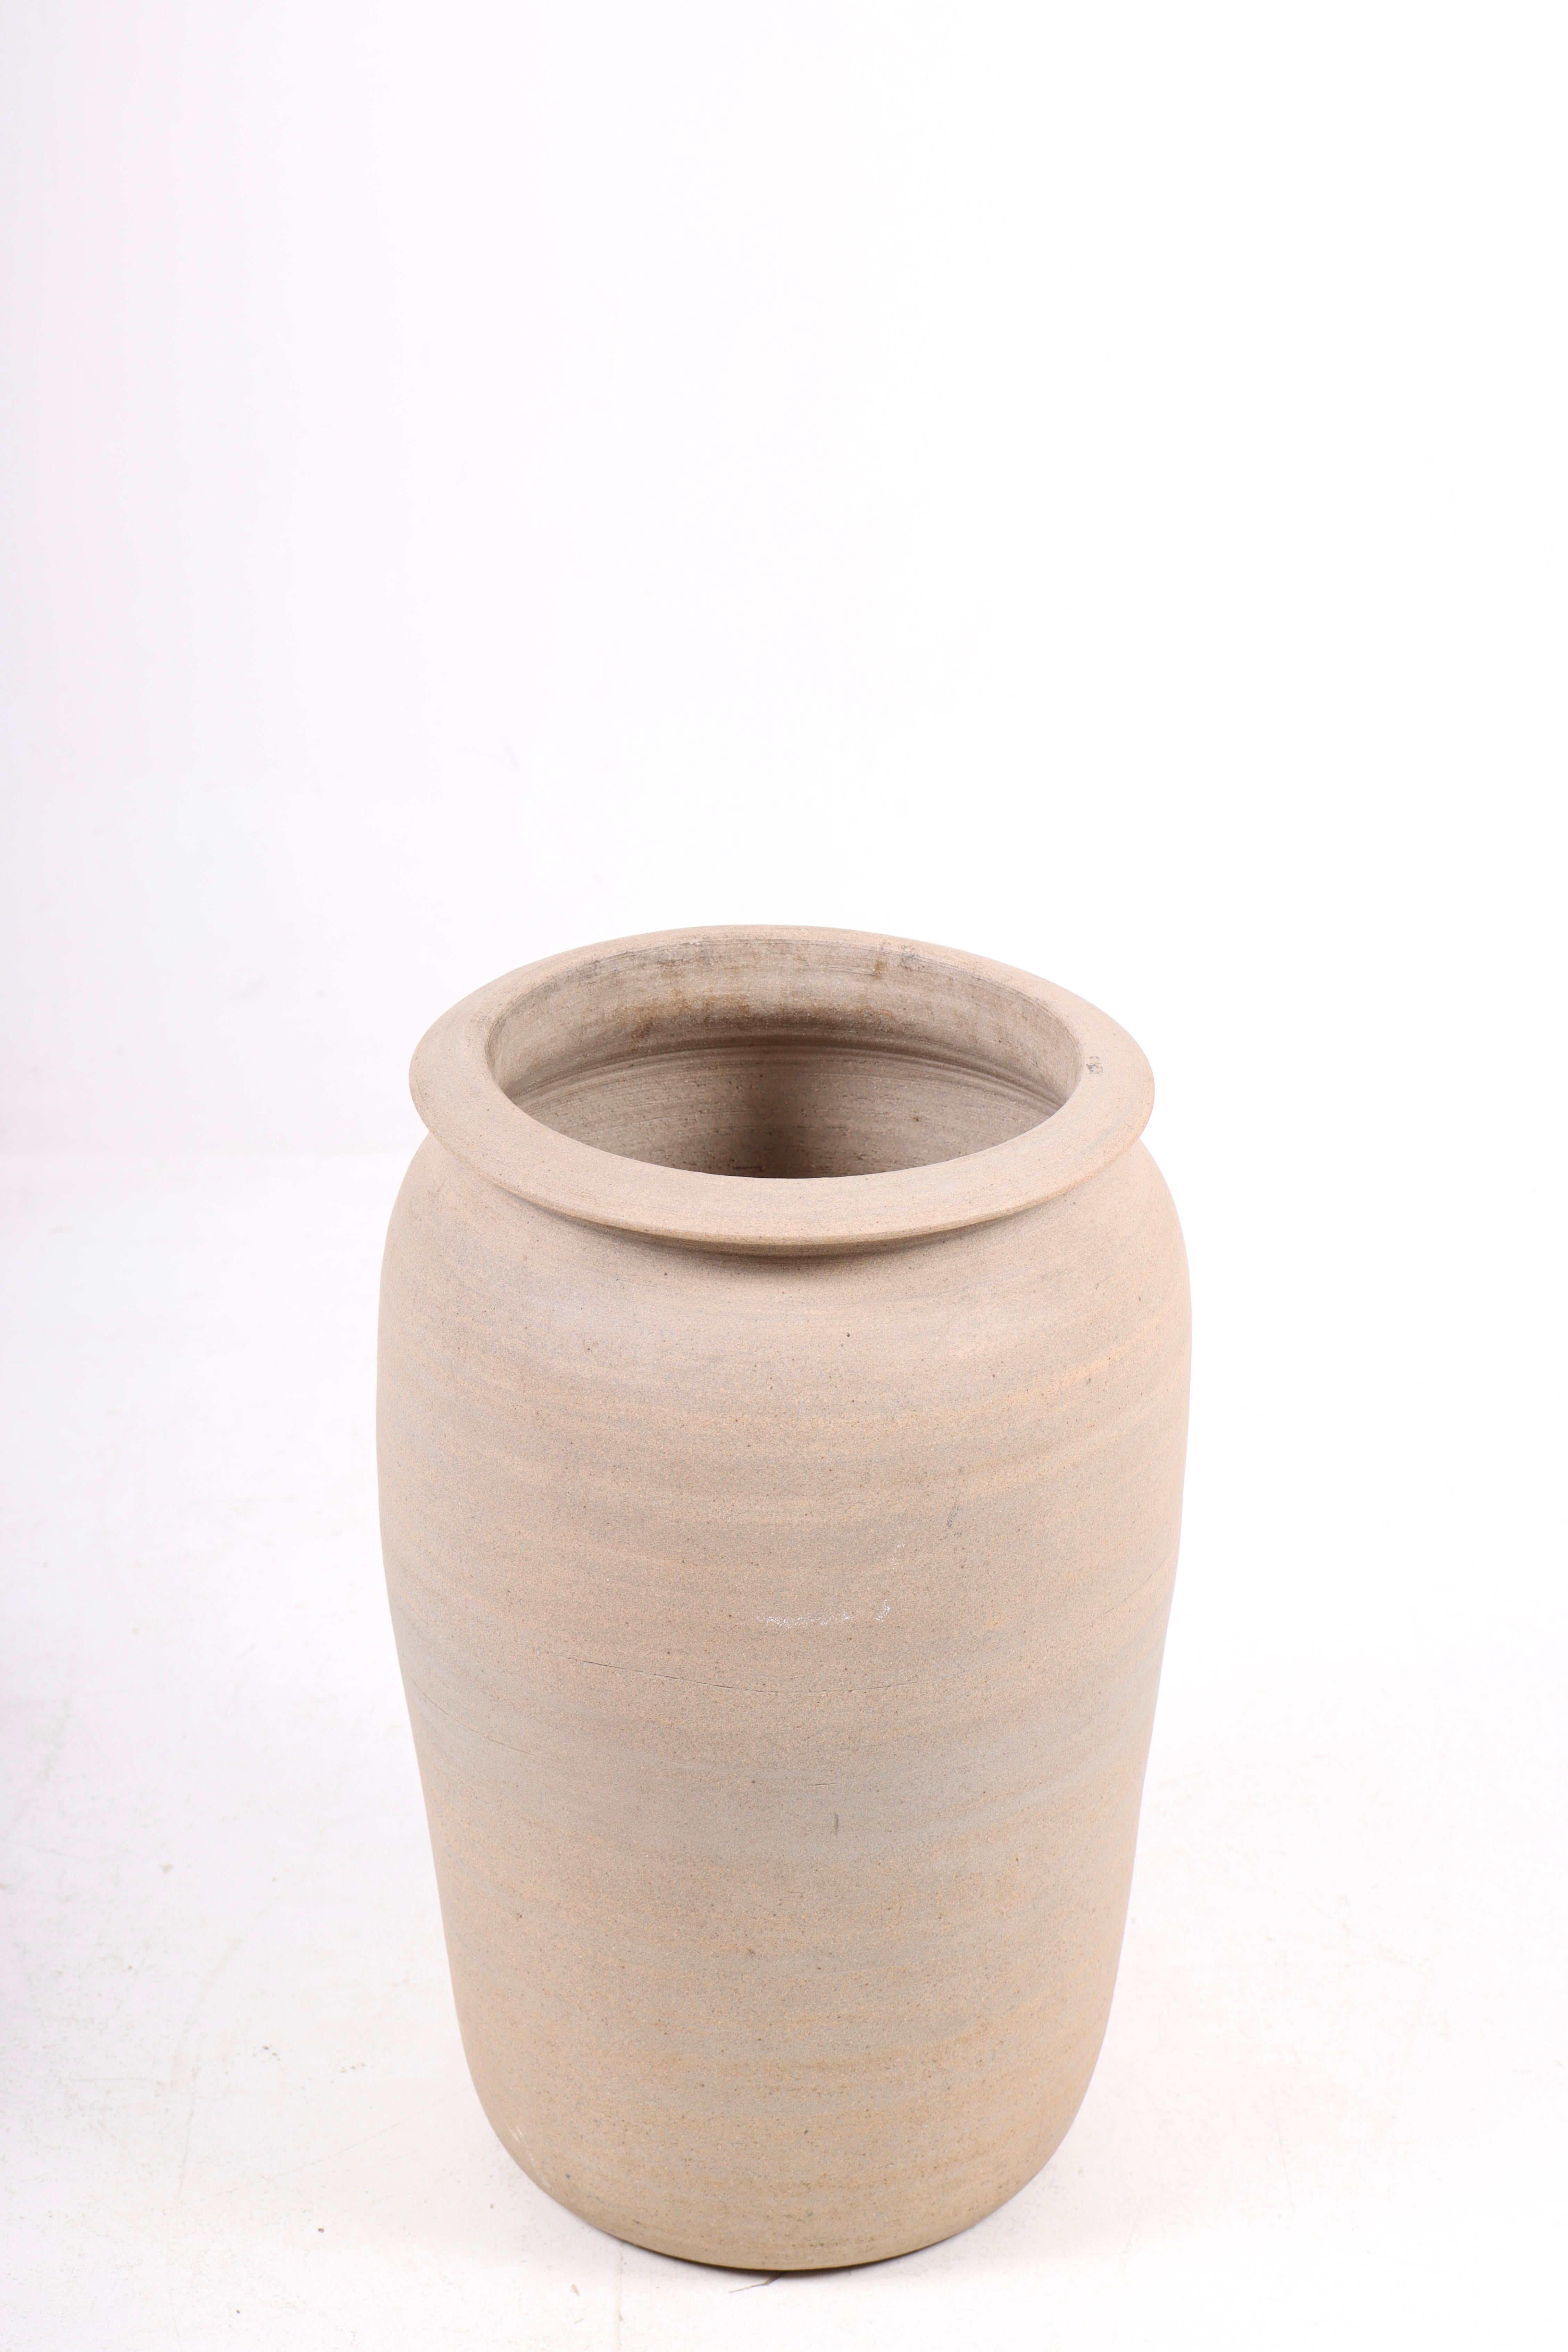 Decorative ceramic vase designed and made by Nils Kähler, Made in Denmark in the 1960s. Great original condition.